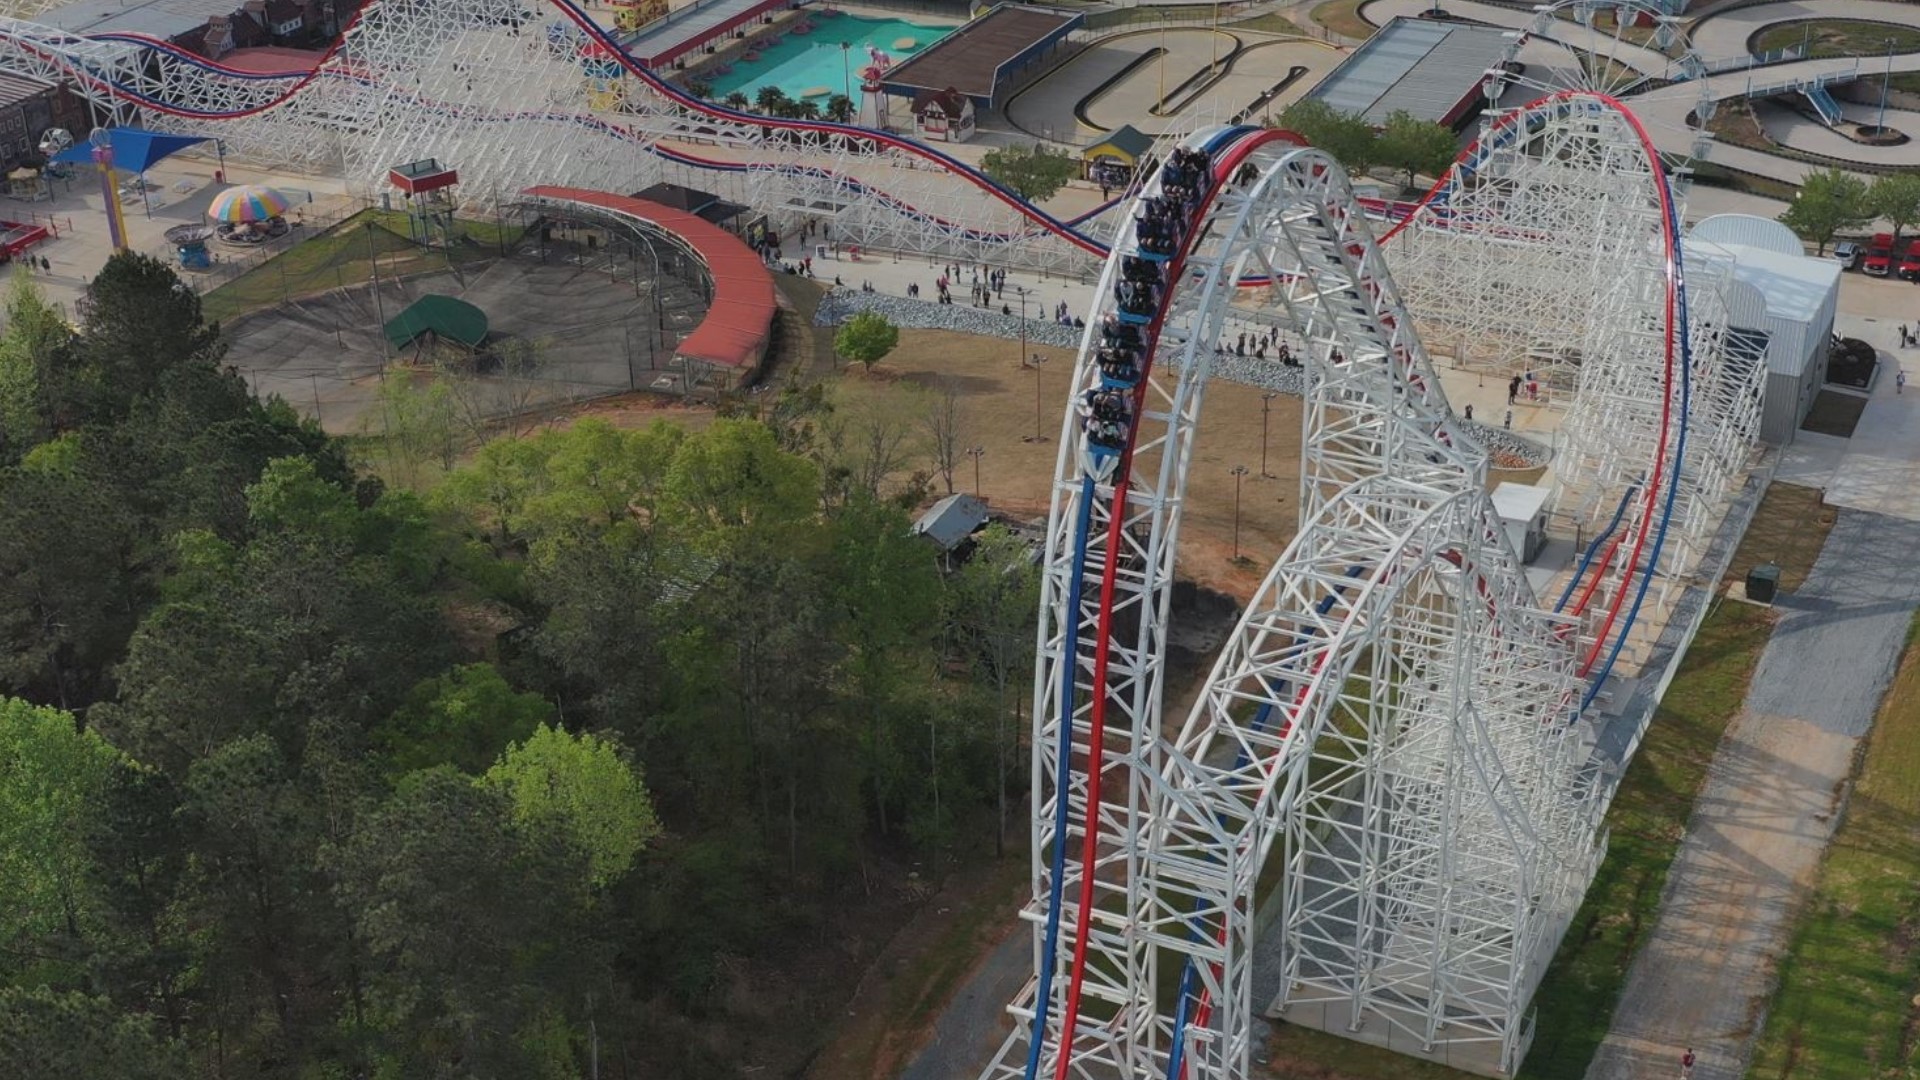 Fun Spot America Atlanta debuted its ArieForceOne, kicking off the spring theme park season with a rush.